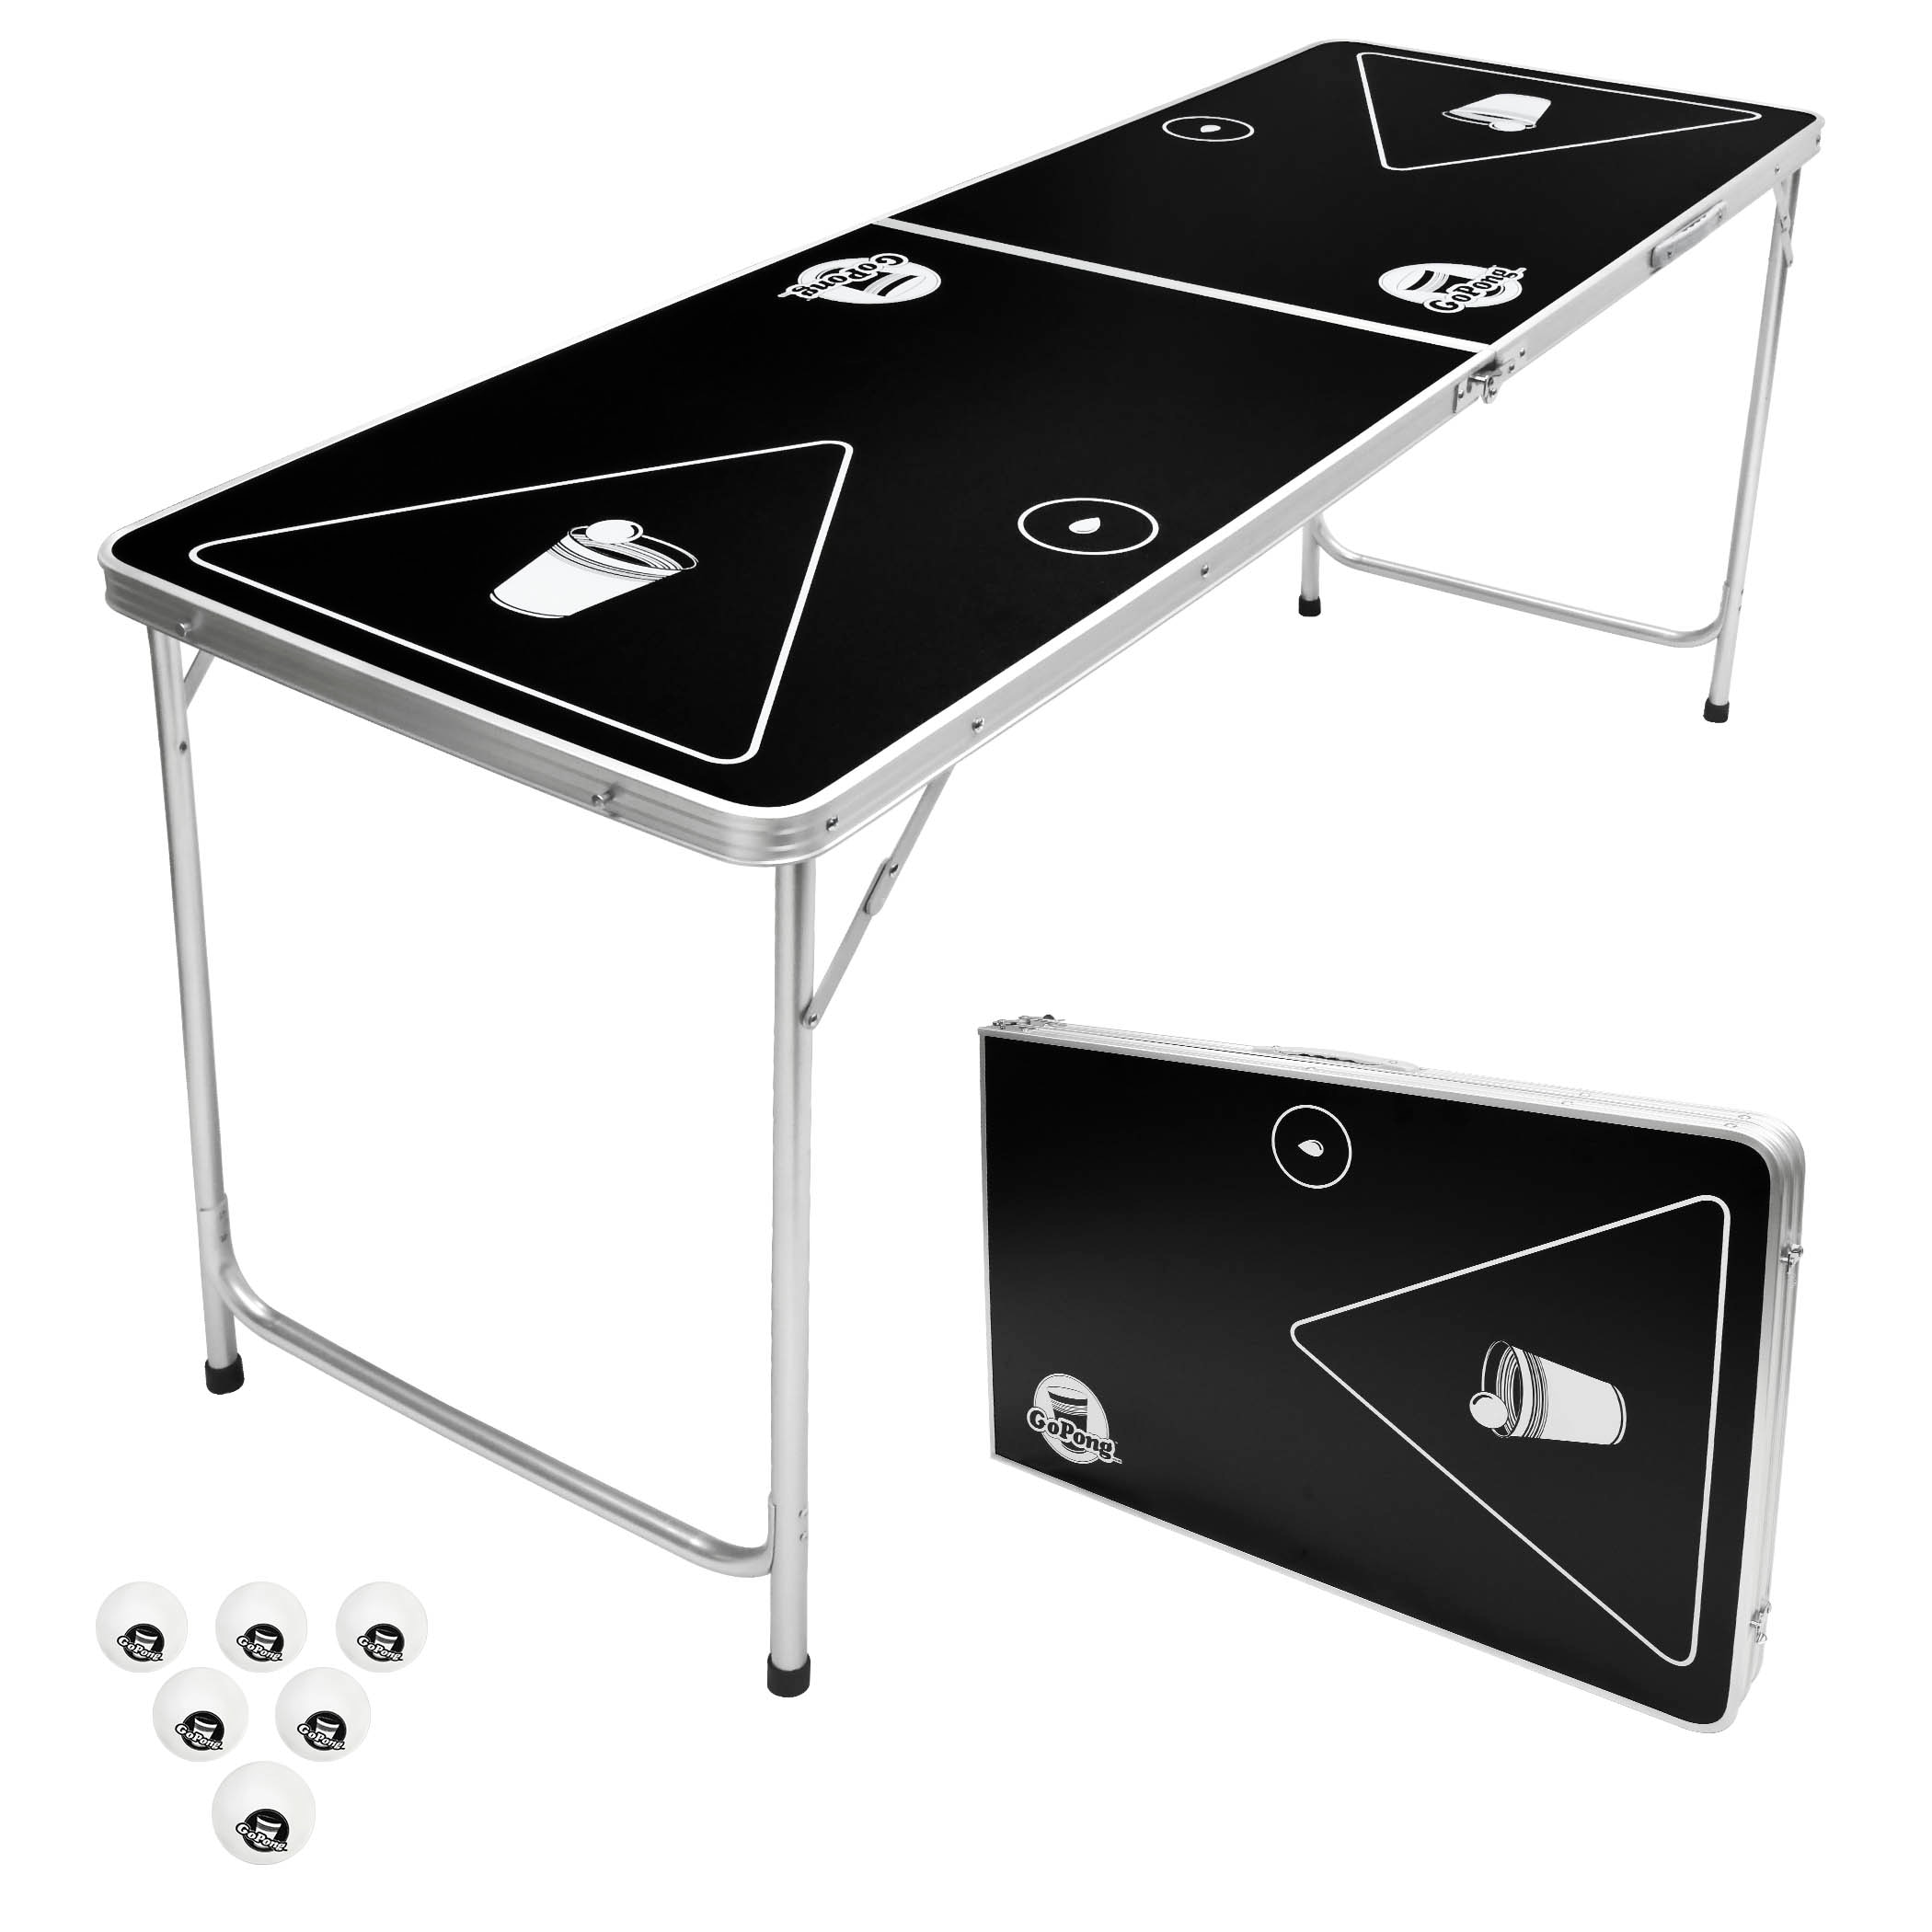 8 Foot Beer Pong Table - Beer Pong Edition — Beer Pong Tables